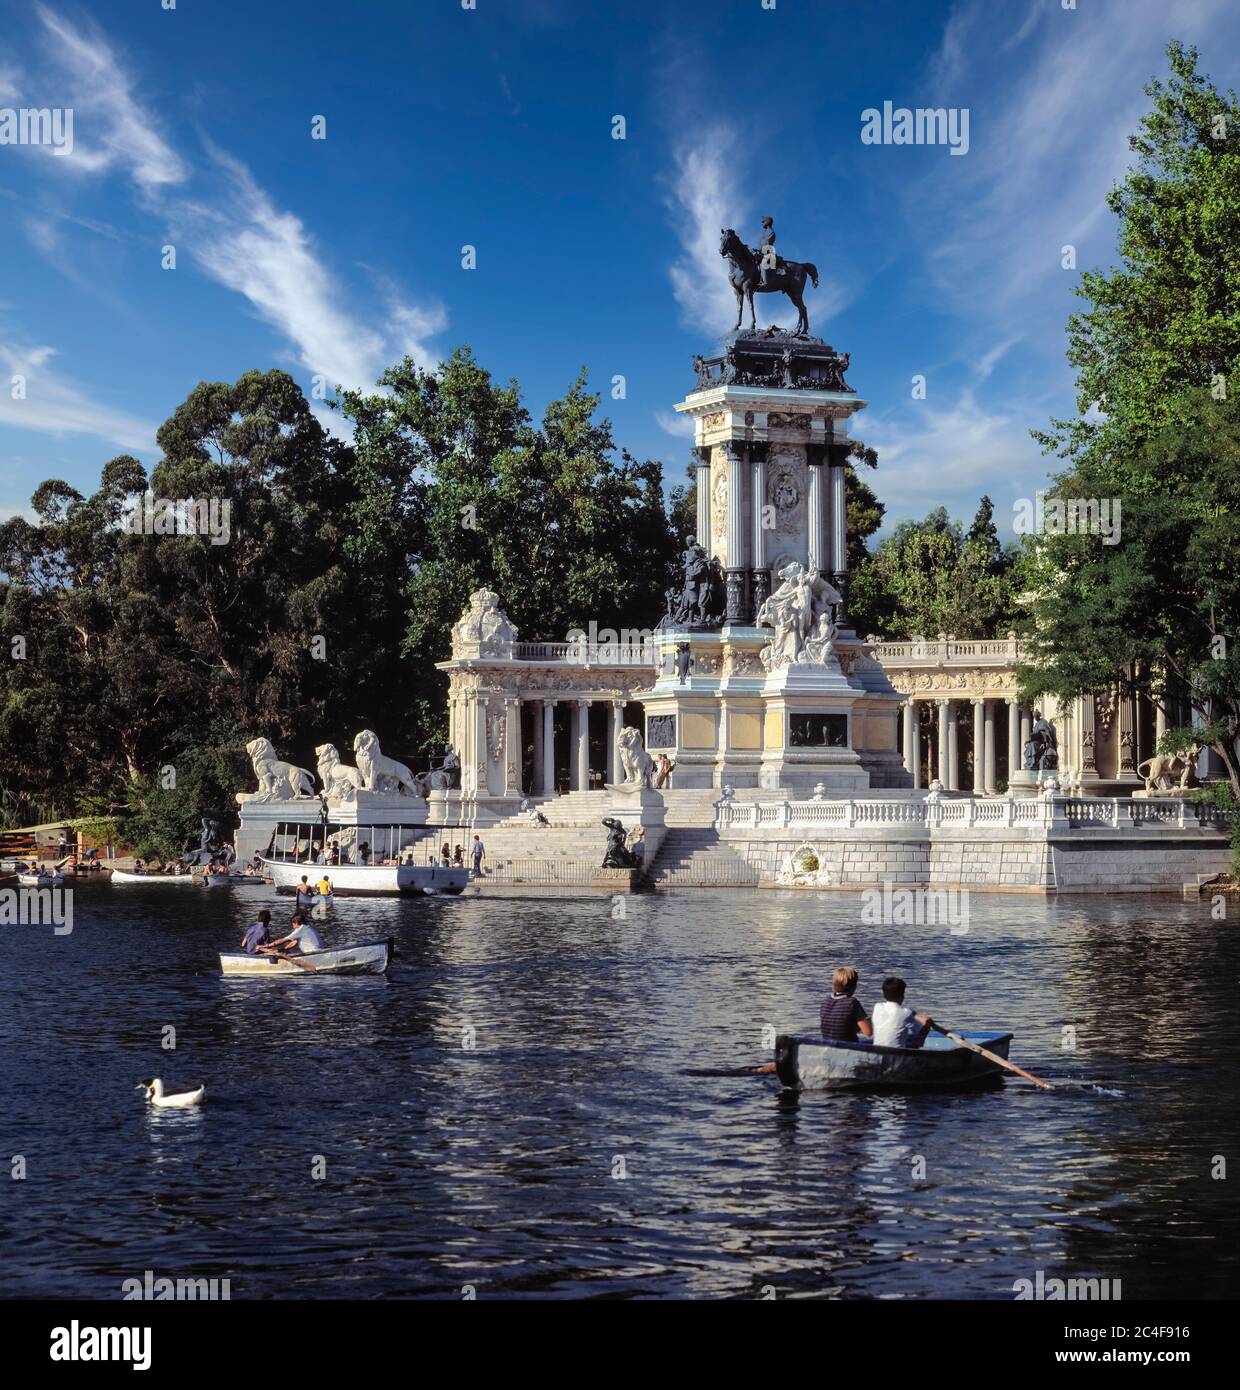 El Retiro Park. Madrid. Spain. Monumnet to Alfonso XII.The Monument to Alfonso XII is located in Buen Retiro Park, Madrid, Spain. The monument is situ Stock Photo